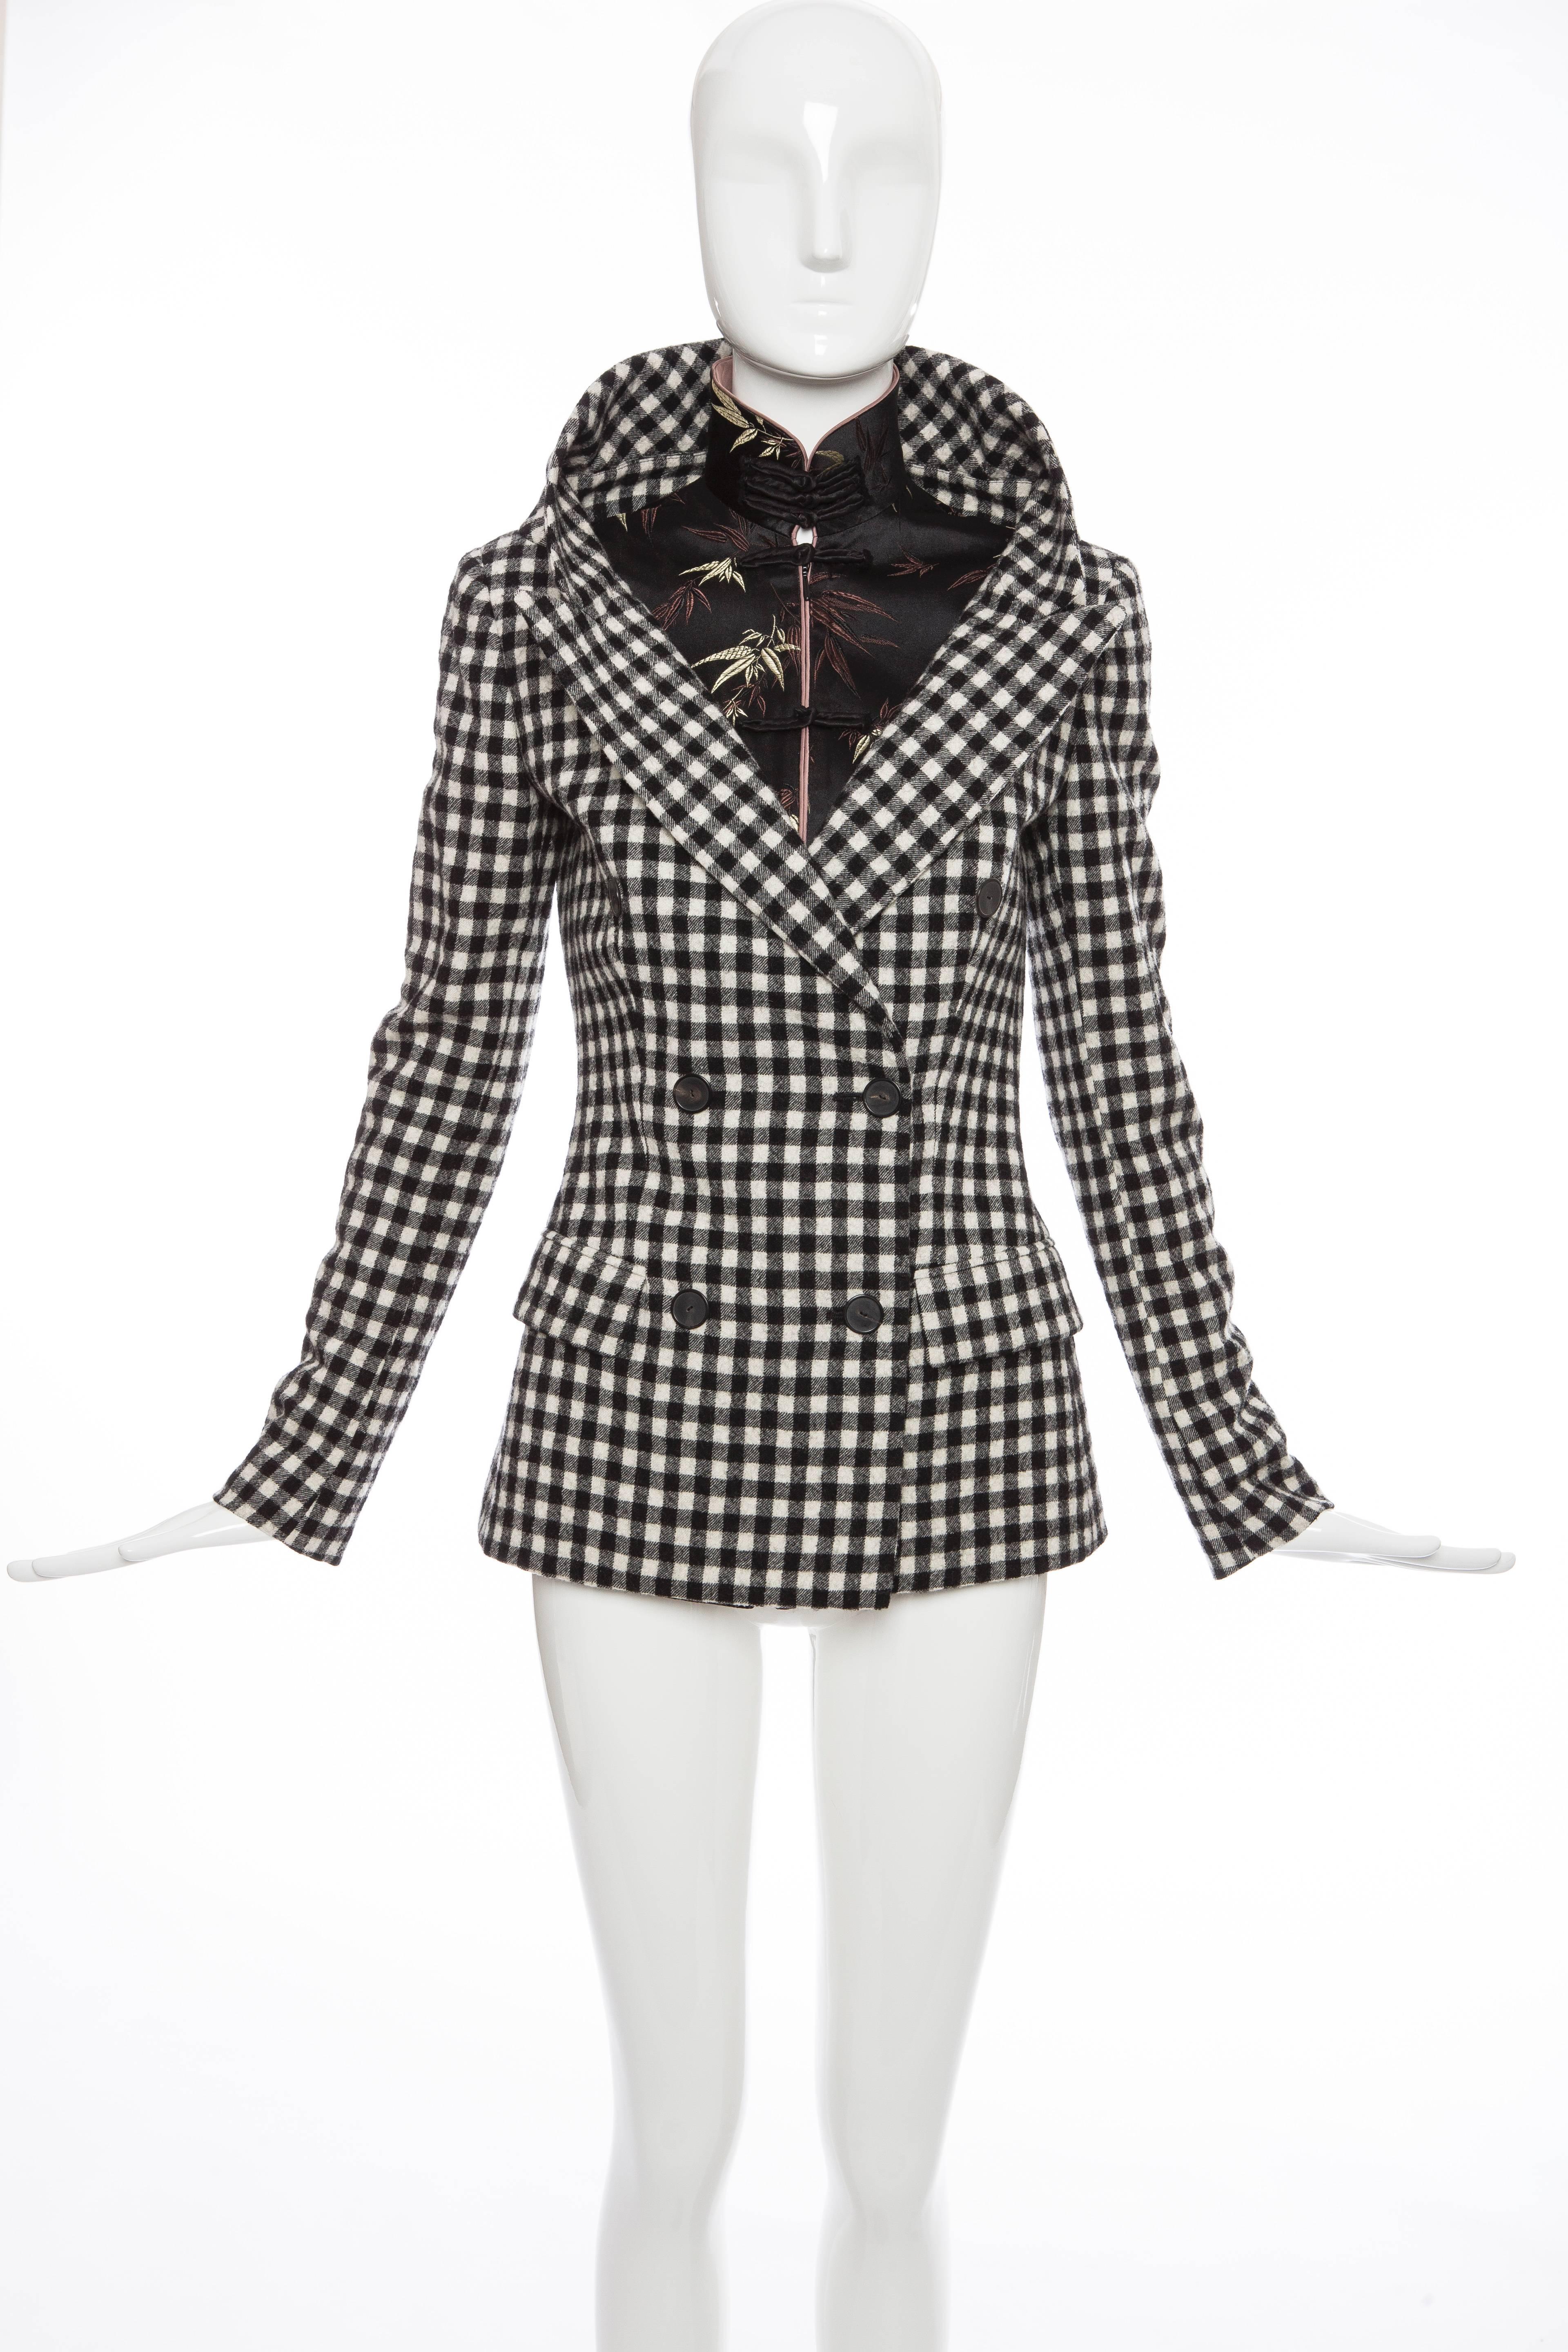 Jean Paul Gaultier, Autumn - Winter 2010 wool, black & white buffalo check double breatsted jacket with long sleeves, embroidered mandarin motif underlay, dual faux flap pockets at front, exposed button closures at center front. and fully lined.

I: